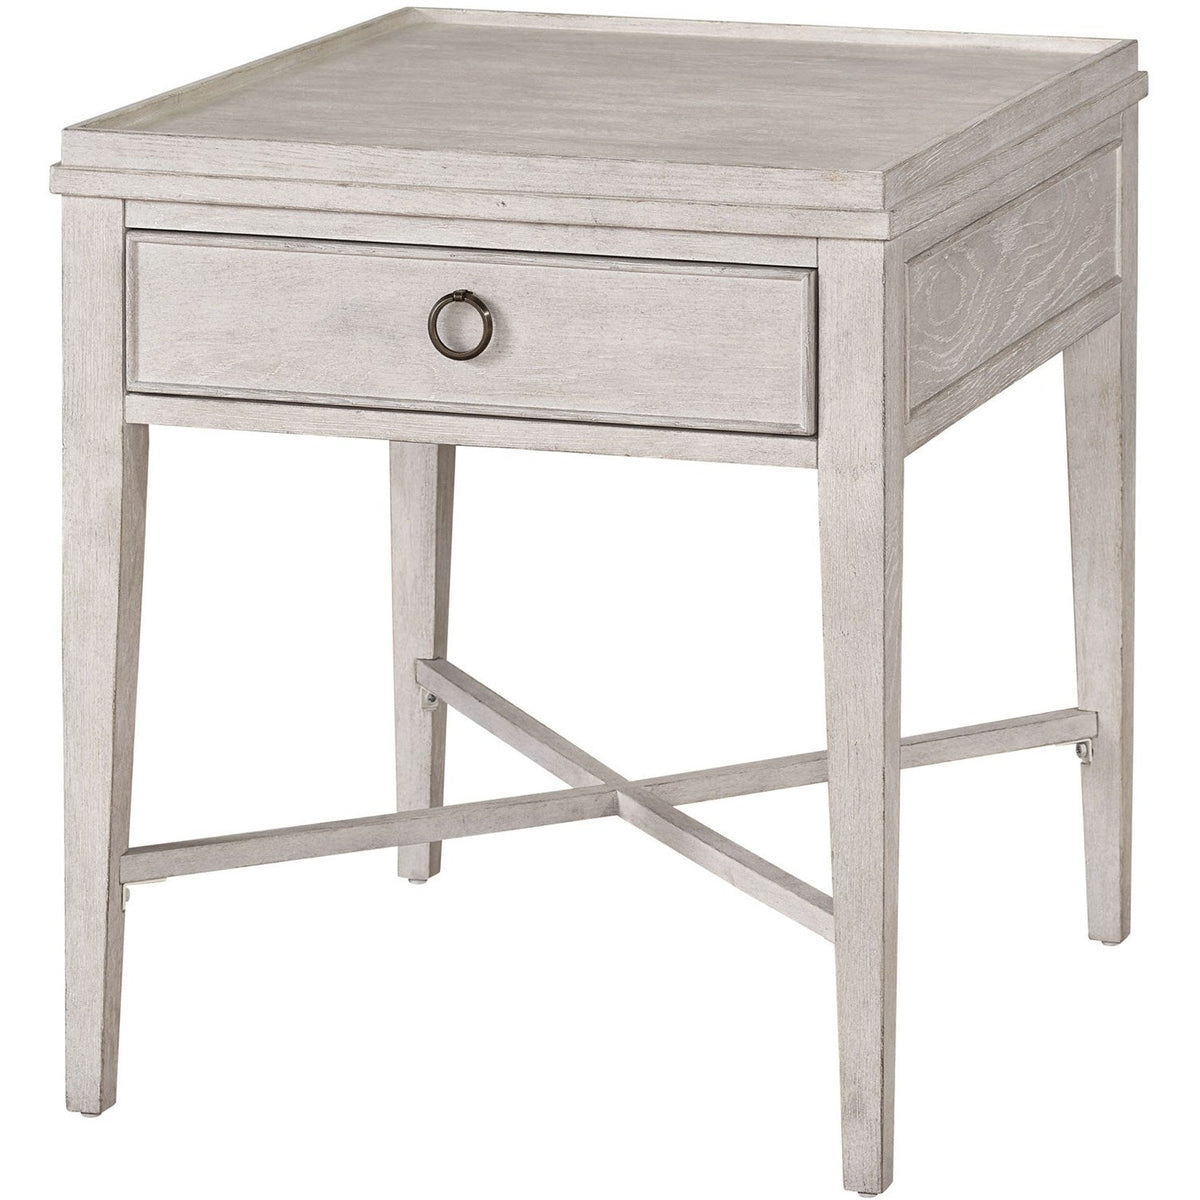 Rectangular End Table - Be Bold Furniture